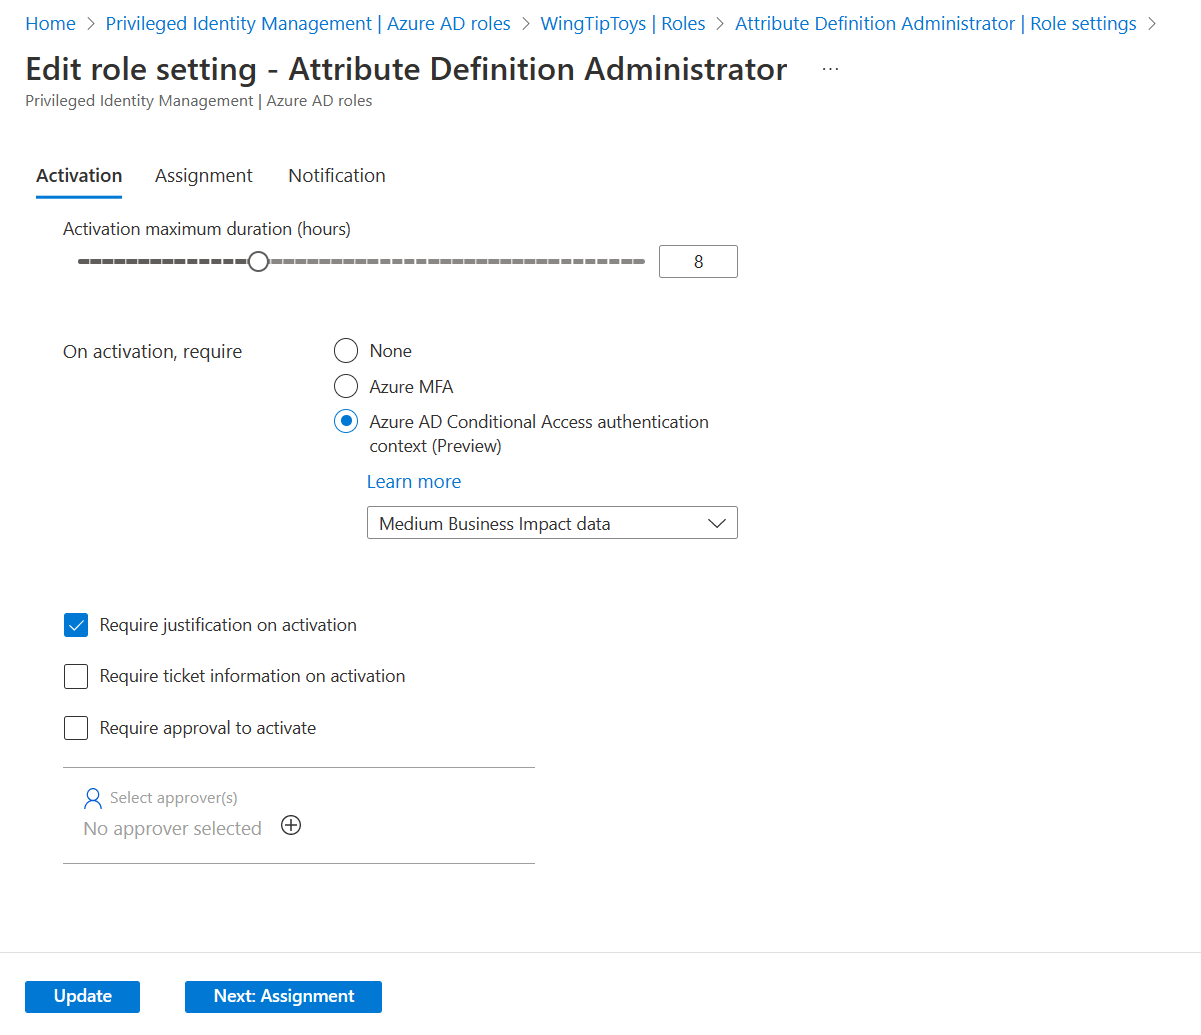 Screenshot that shows the Edit role setting - Attribute Definition Administrator page.